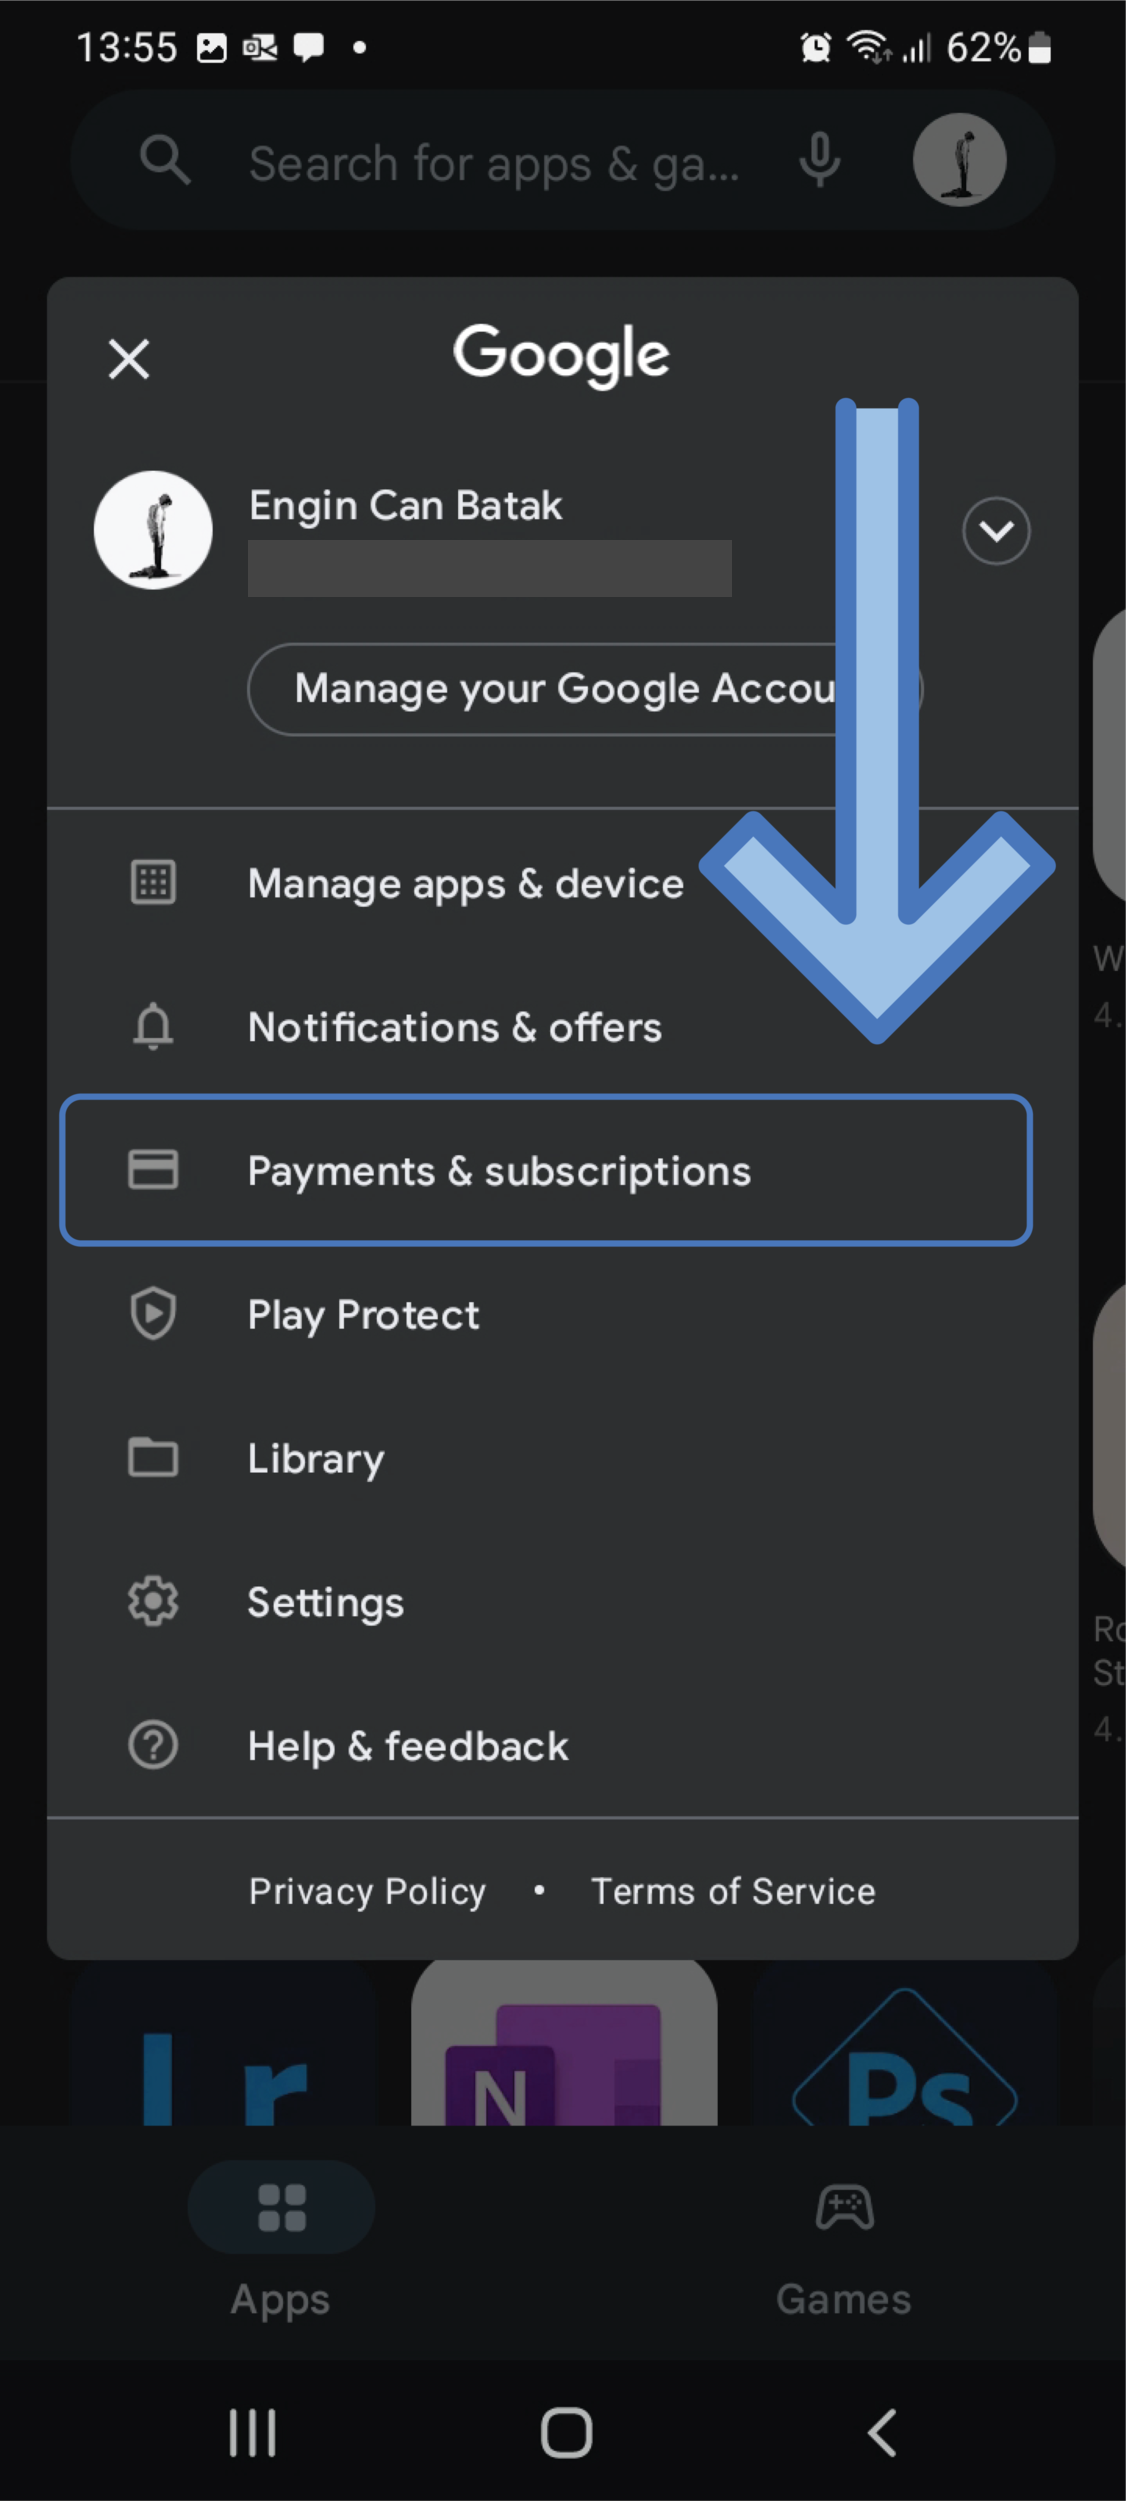 Select ‘Payments & subscriptions’